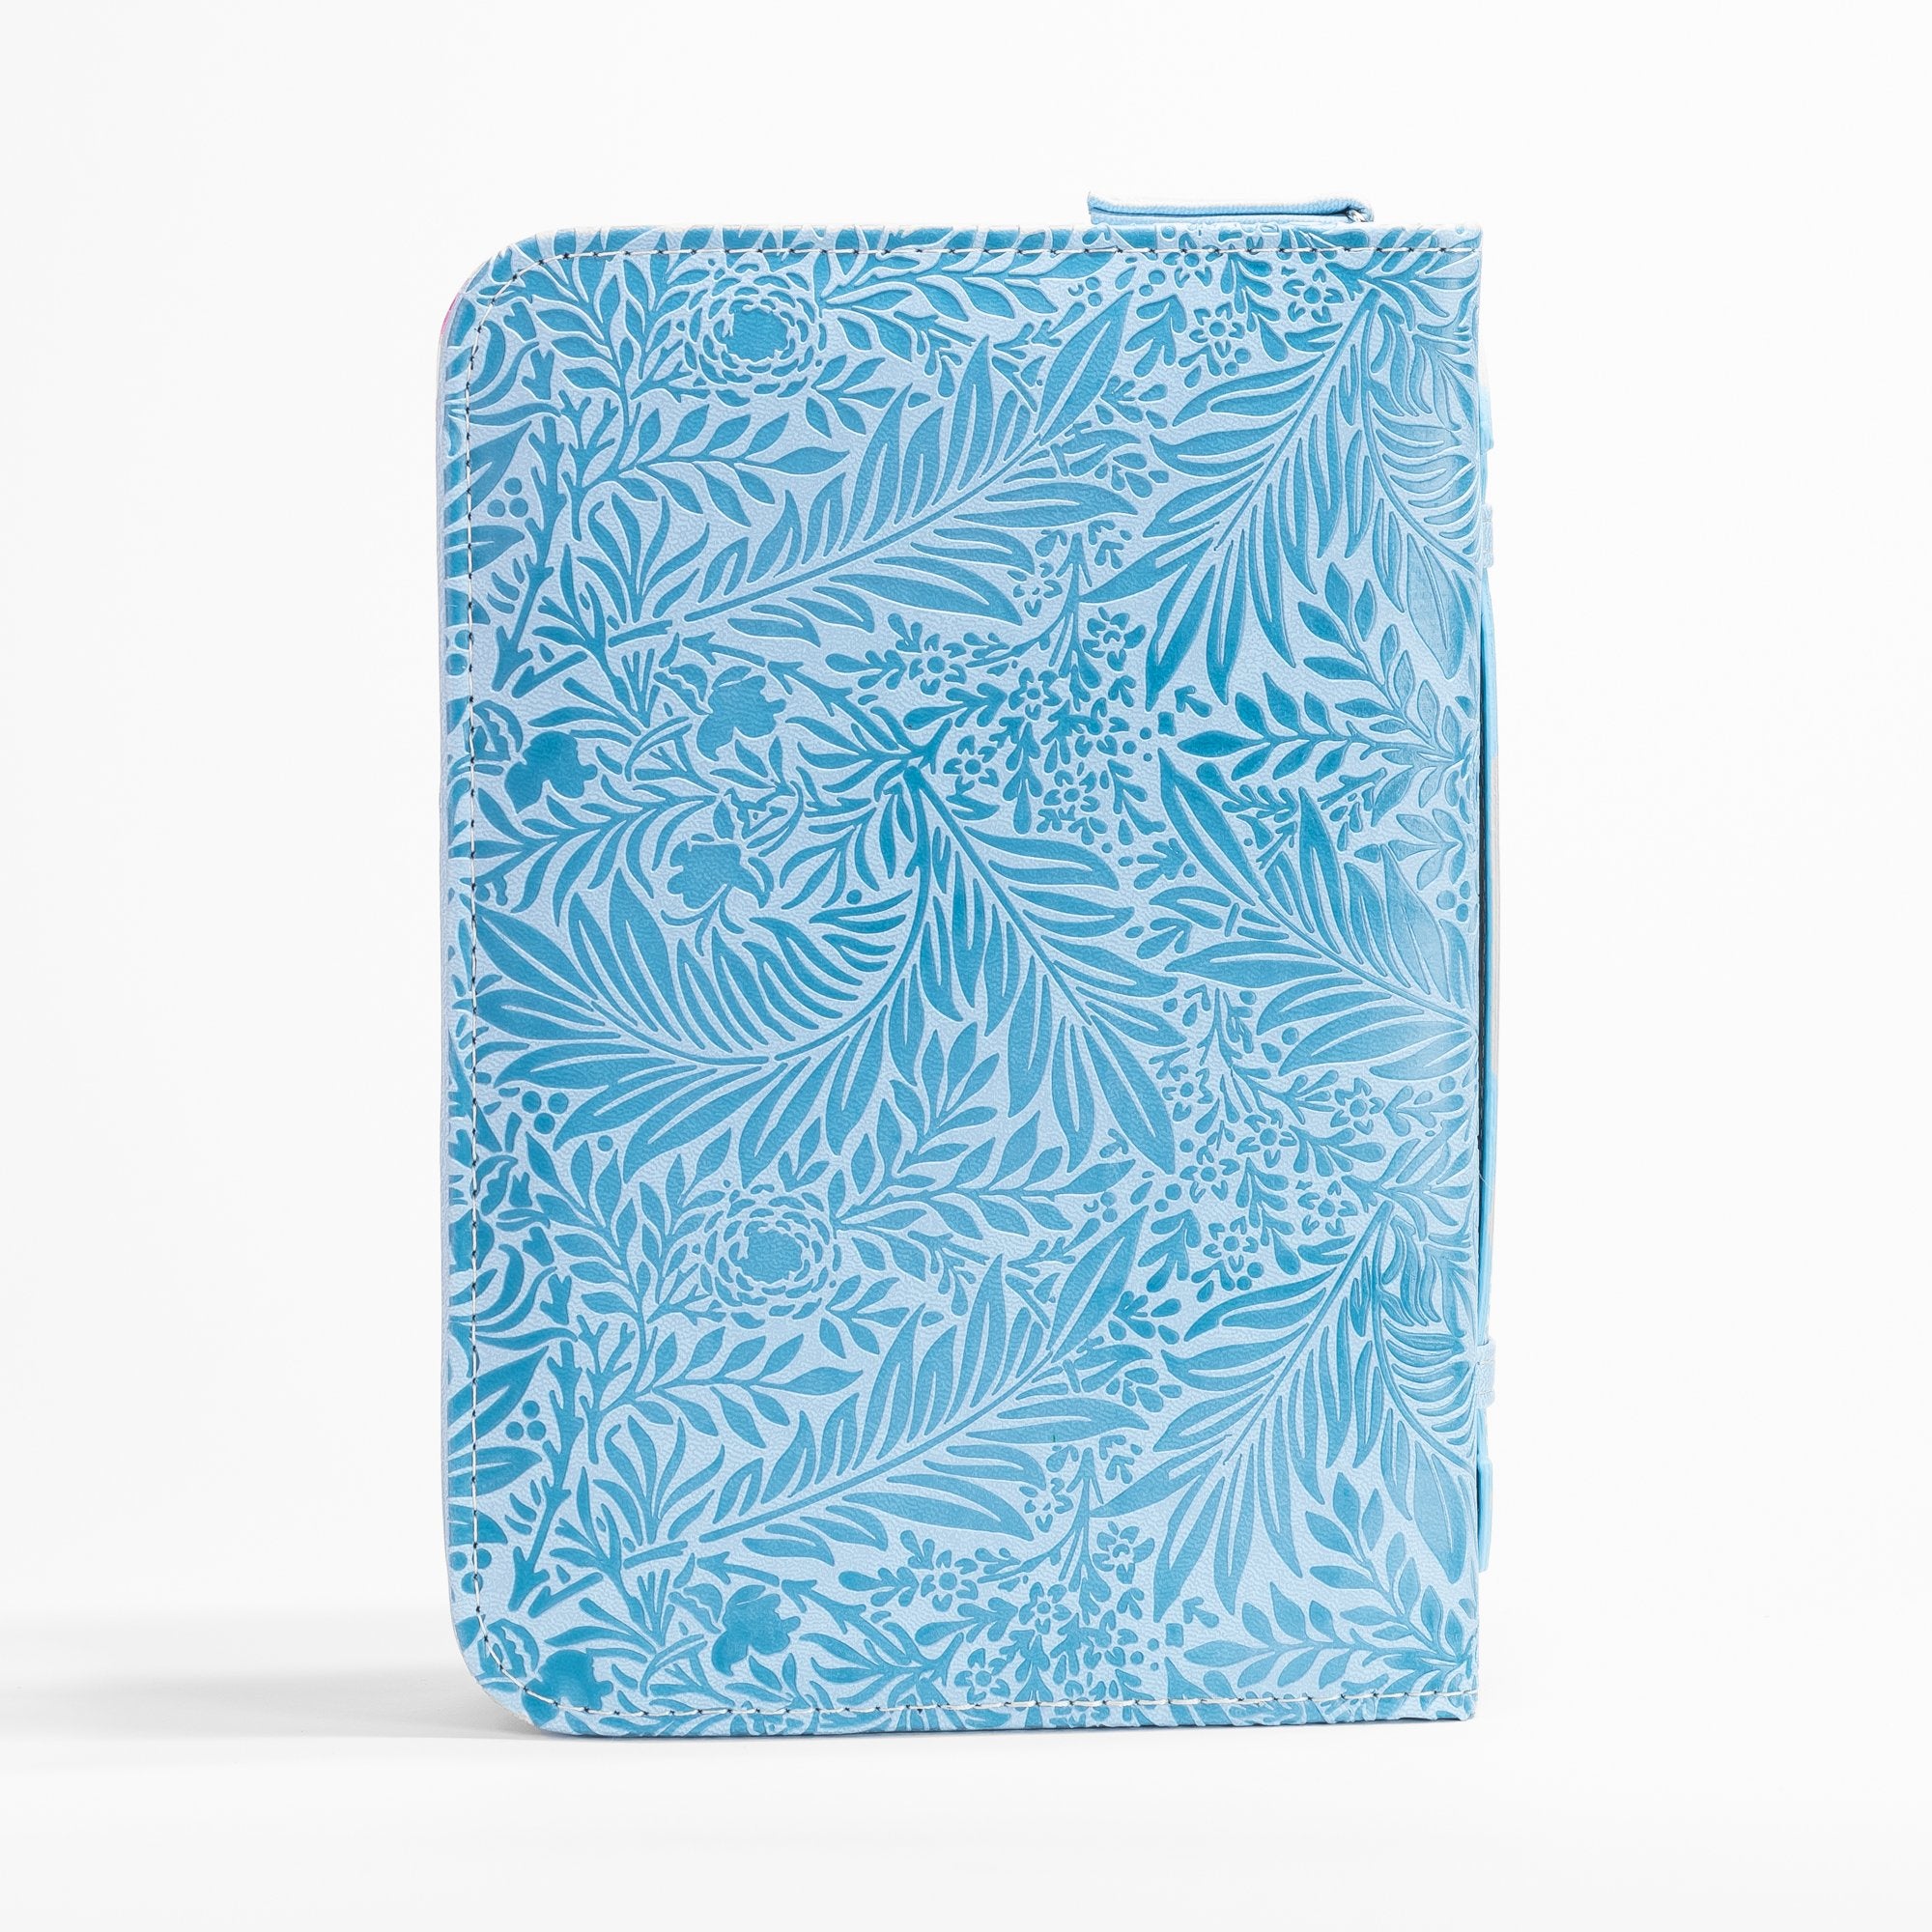 Divine Details: Bible Cover - Blue Floral Love has been poured into our Hearts - Romans 5:5